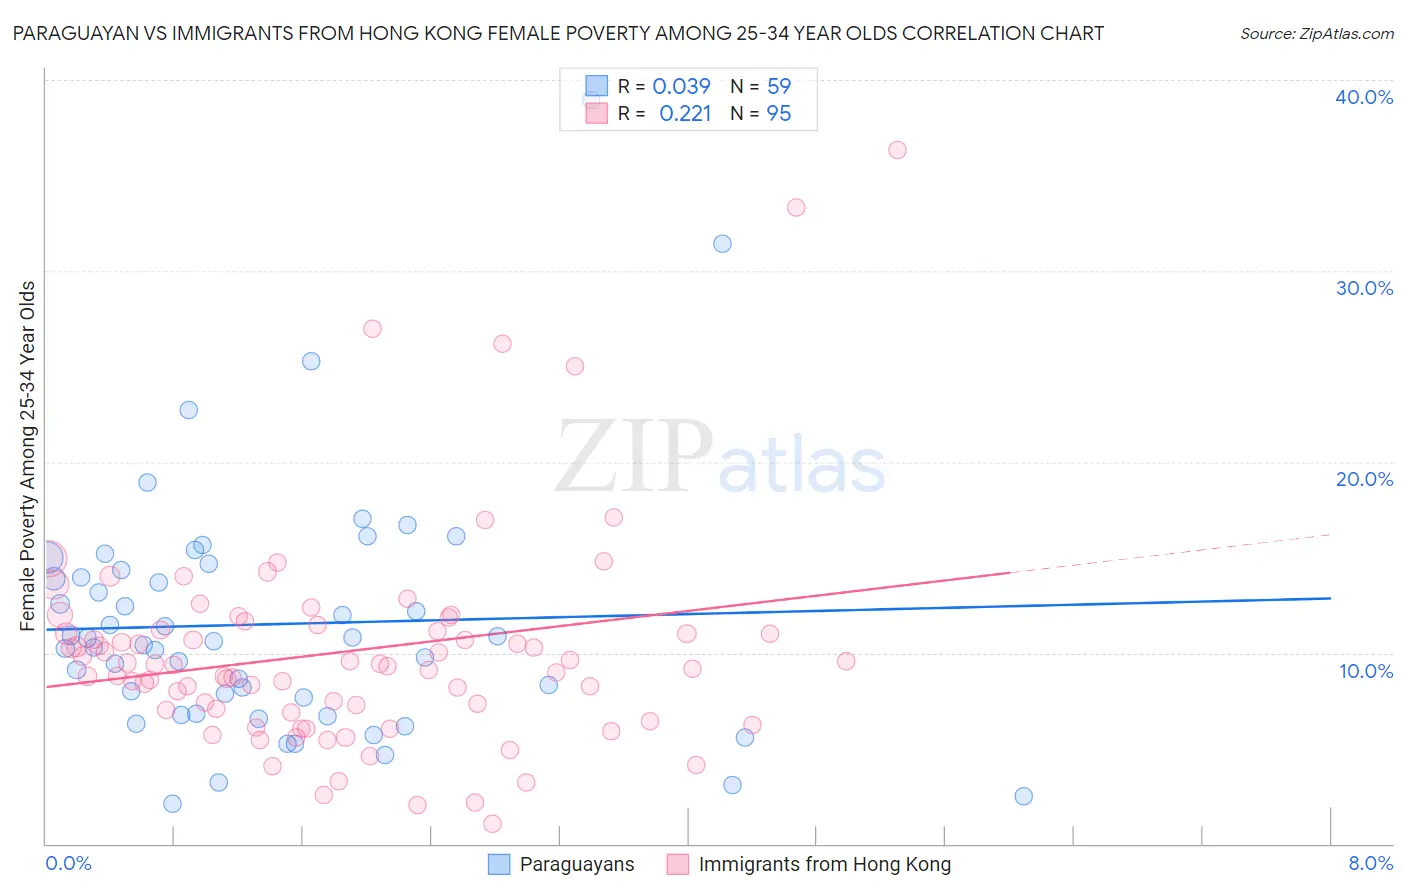 Paraguayan vs Immigrants from Hong Kong Female Poverty Among 25-34 Year Olds